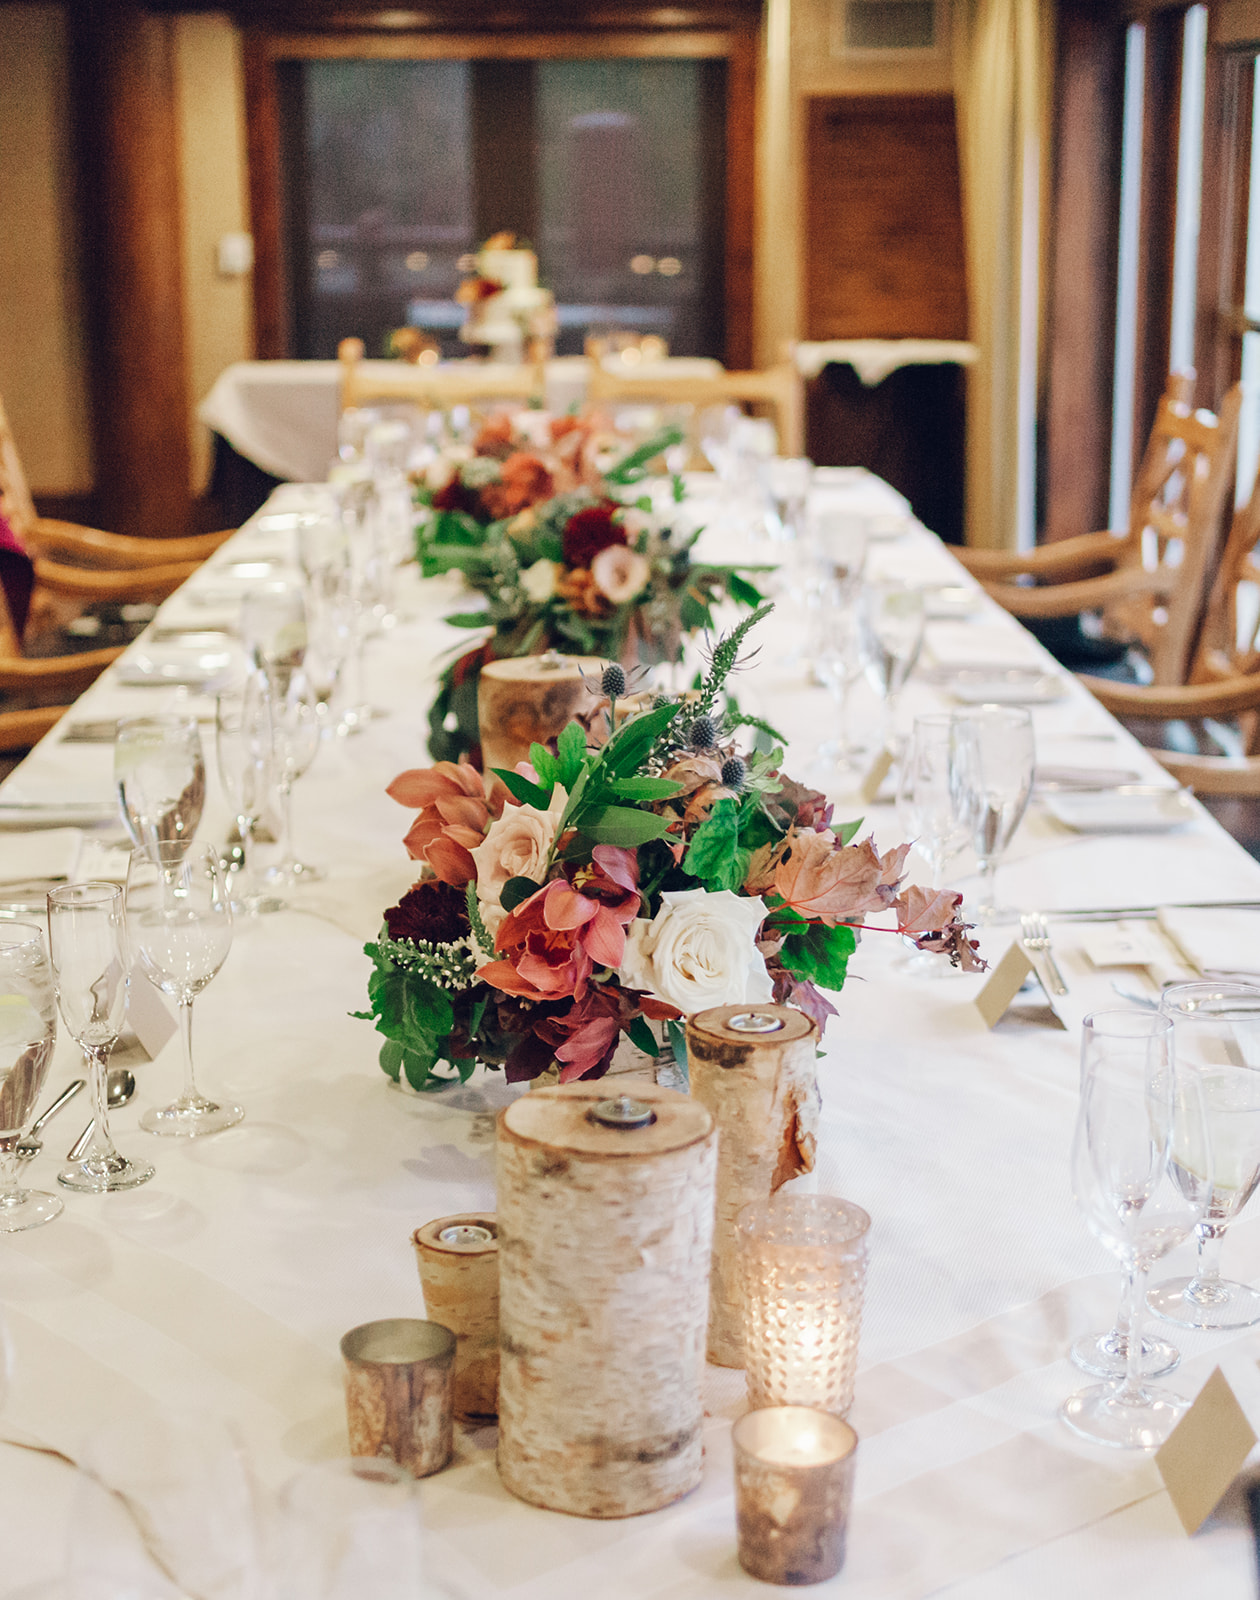 A fall wedding in Park City Utah. The tablescape features green, white, ad dark rose colored florals.